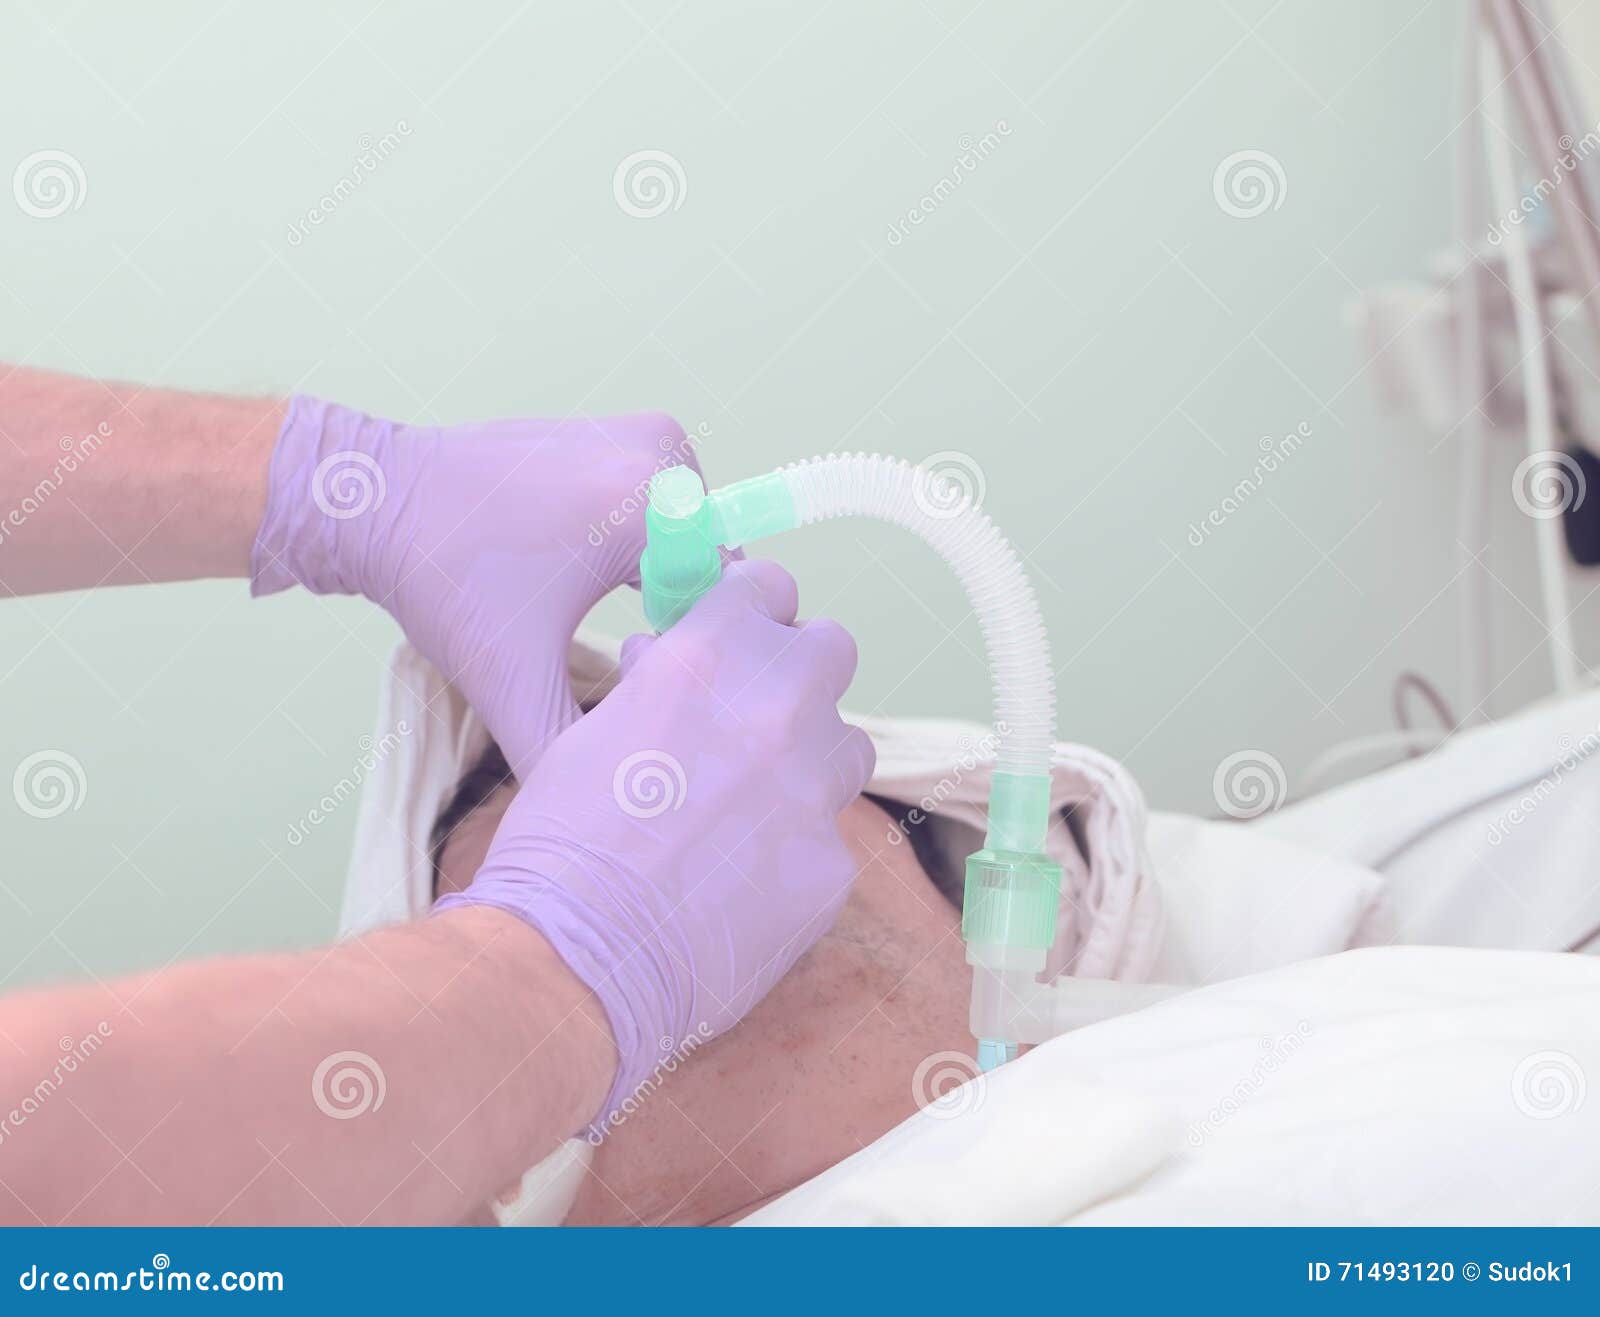 anaesthetist intubated critically ill patients